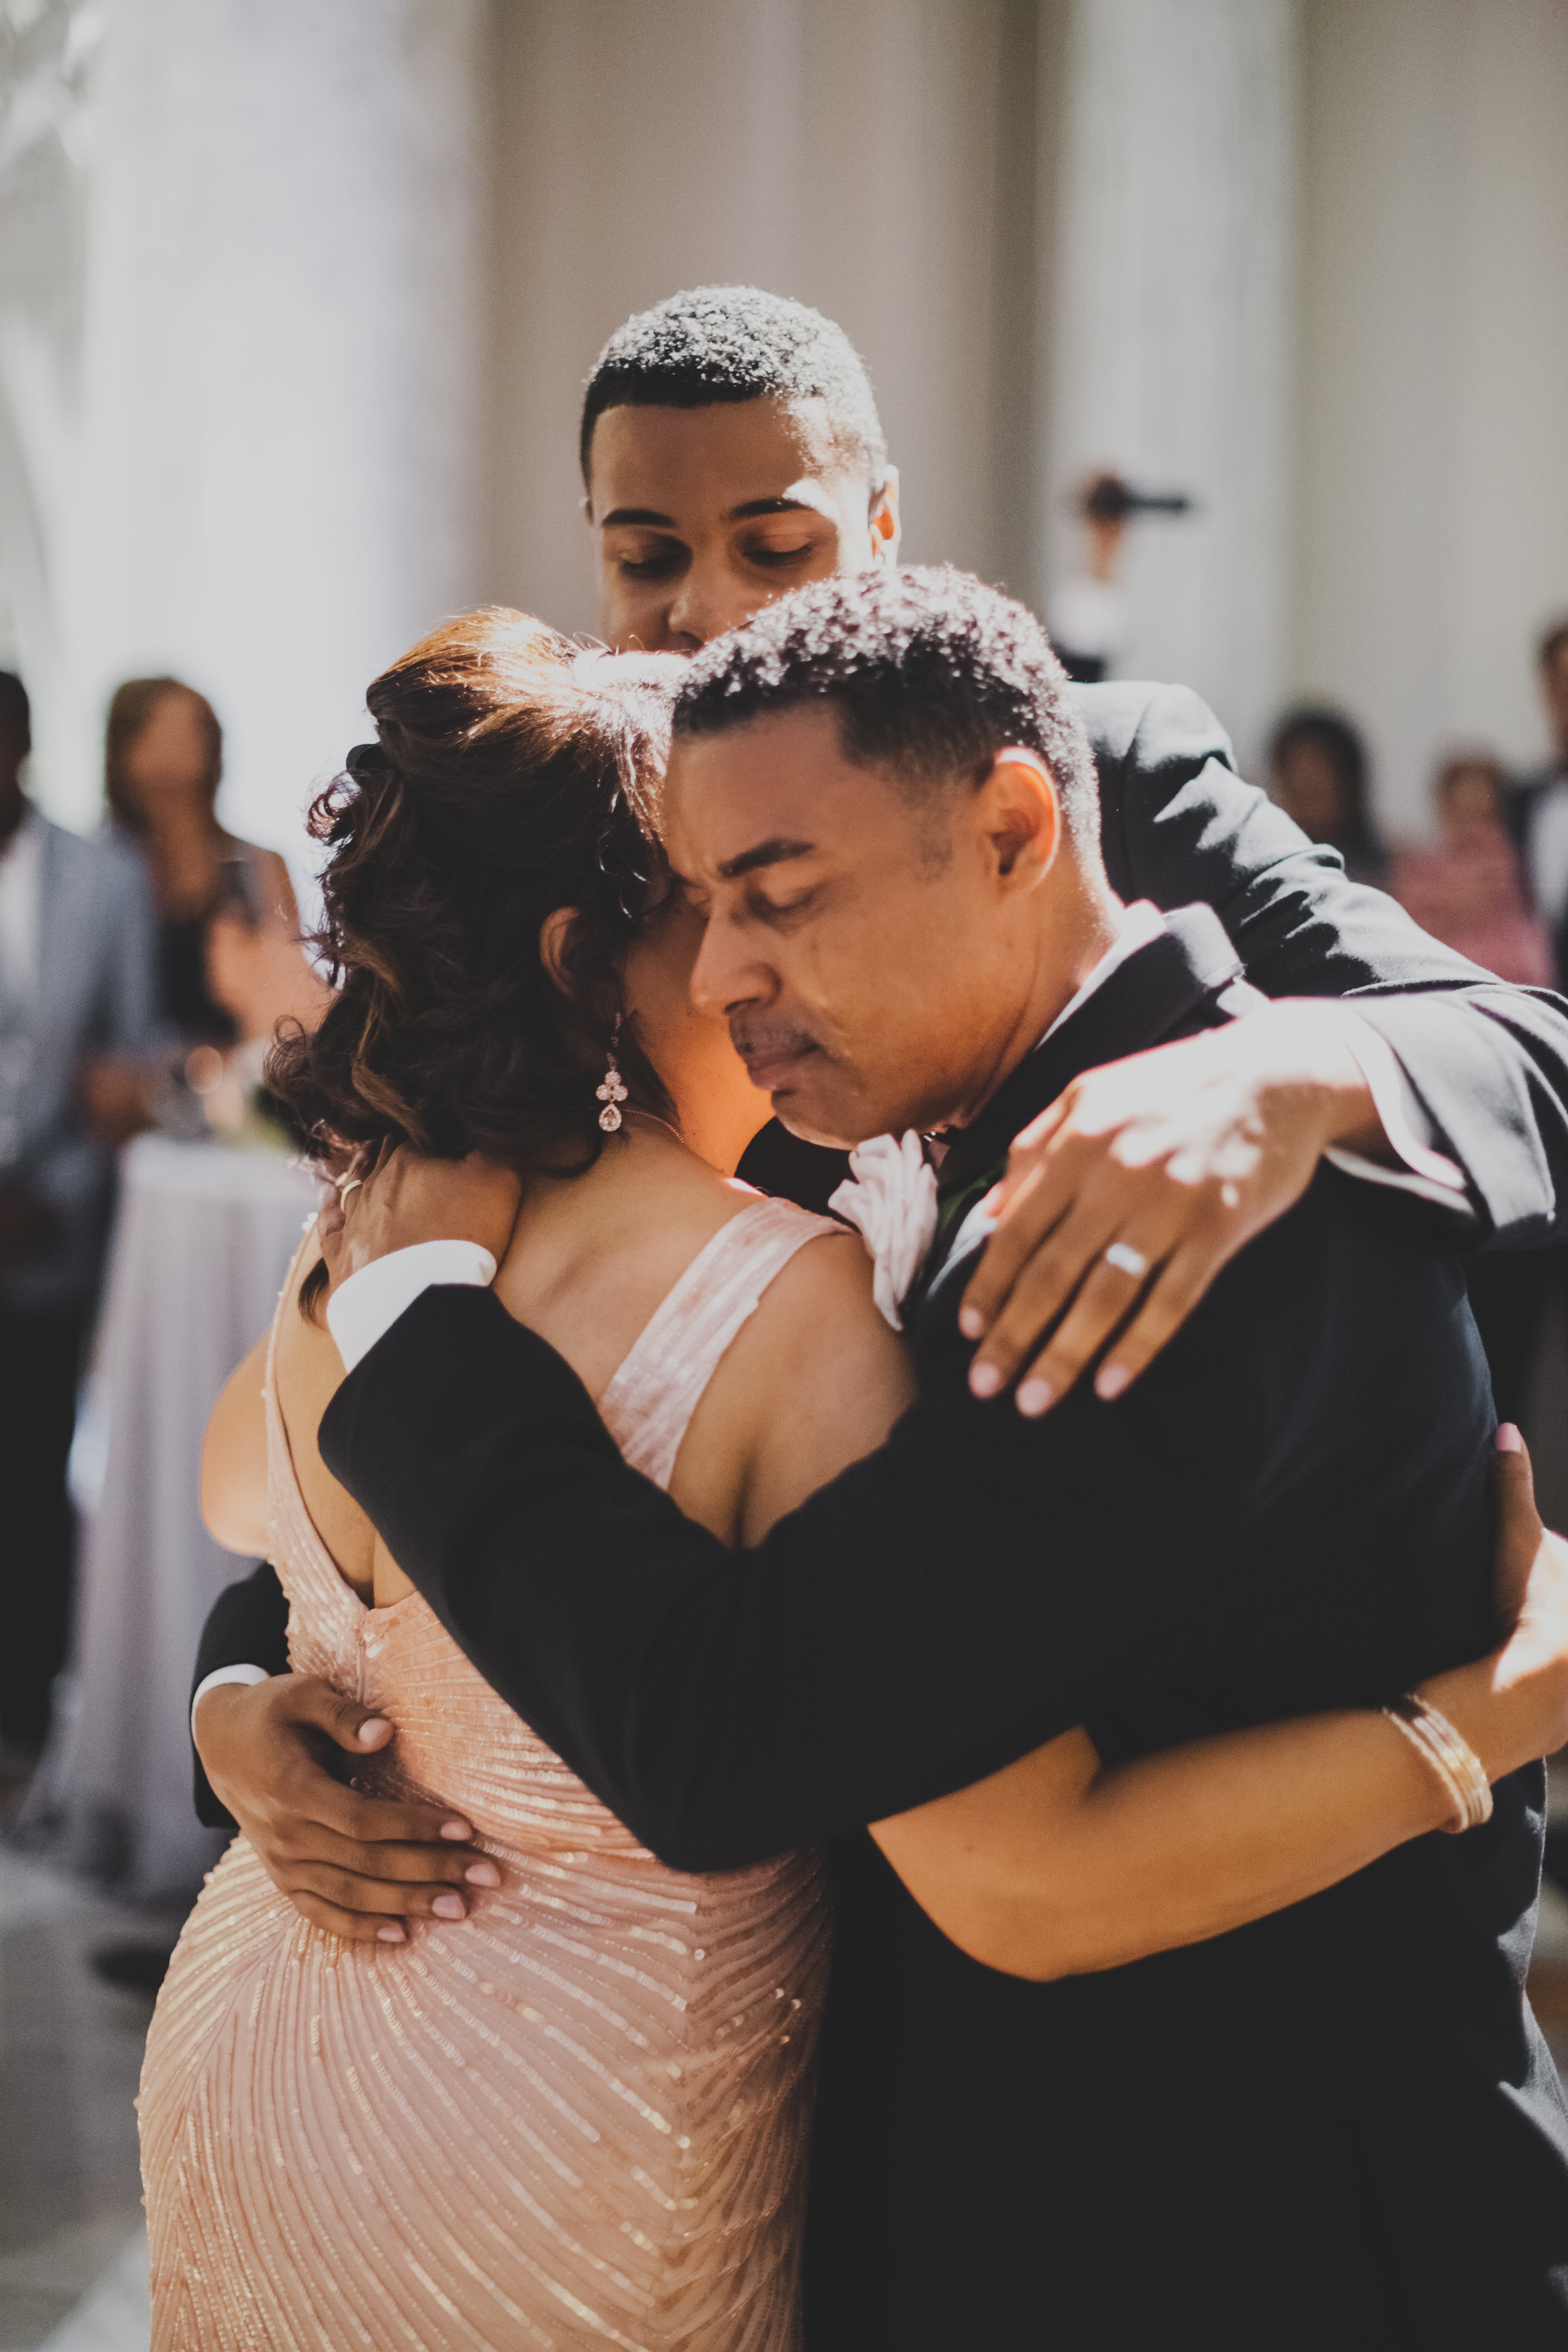 Bridal Bliss: Robert and Jeanette’s Modern D.C. Wedding Was Stunning